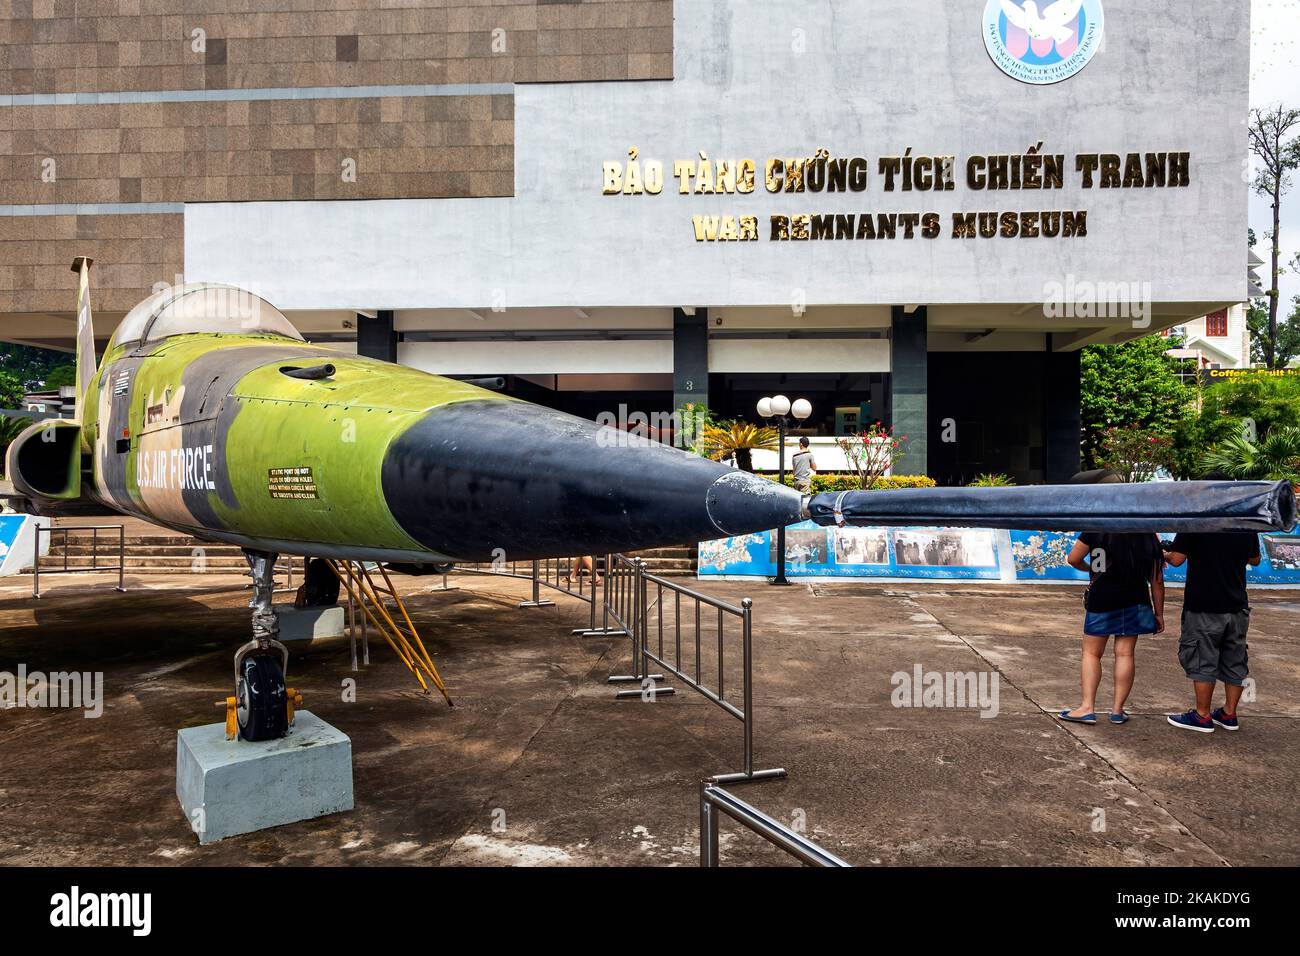 US Air Force fighter jet and visitors at War Remnants Museum, Ho Chi Minh City, Vietnam Stock Photo